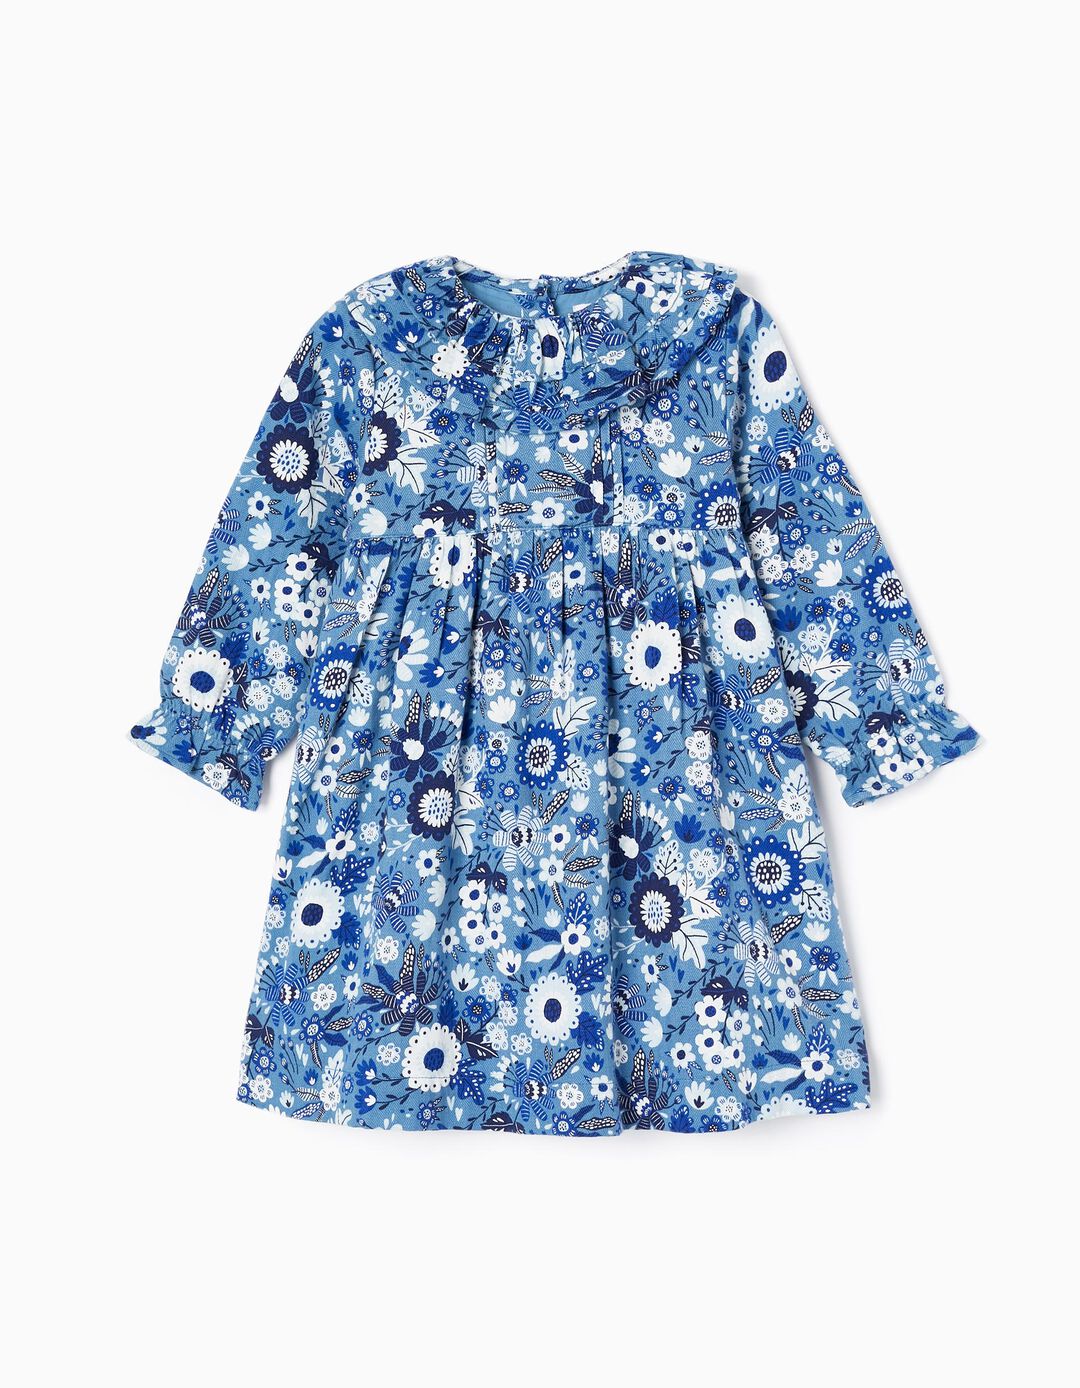 Cotton Dress with Floral Motif for Baby Girls, Blue/White